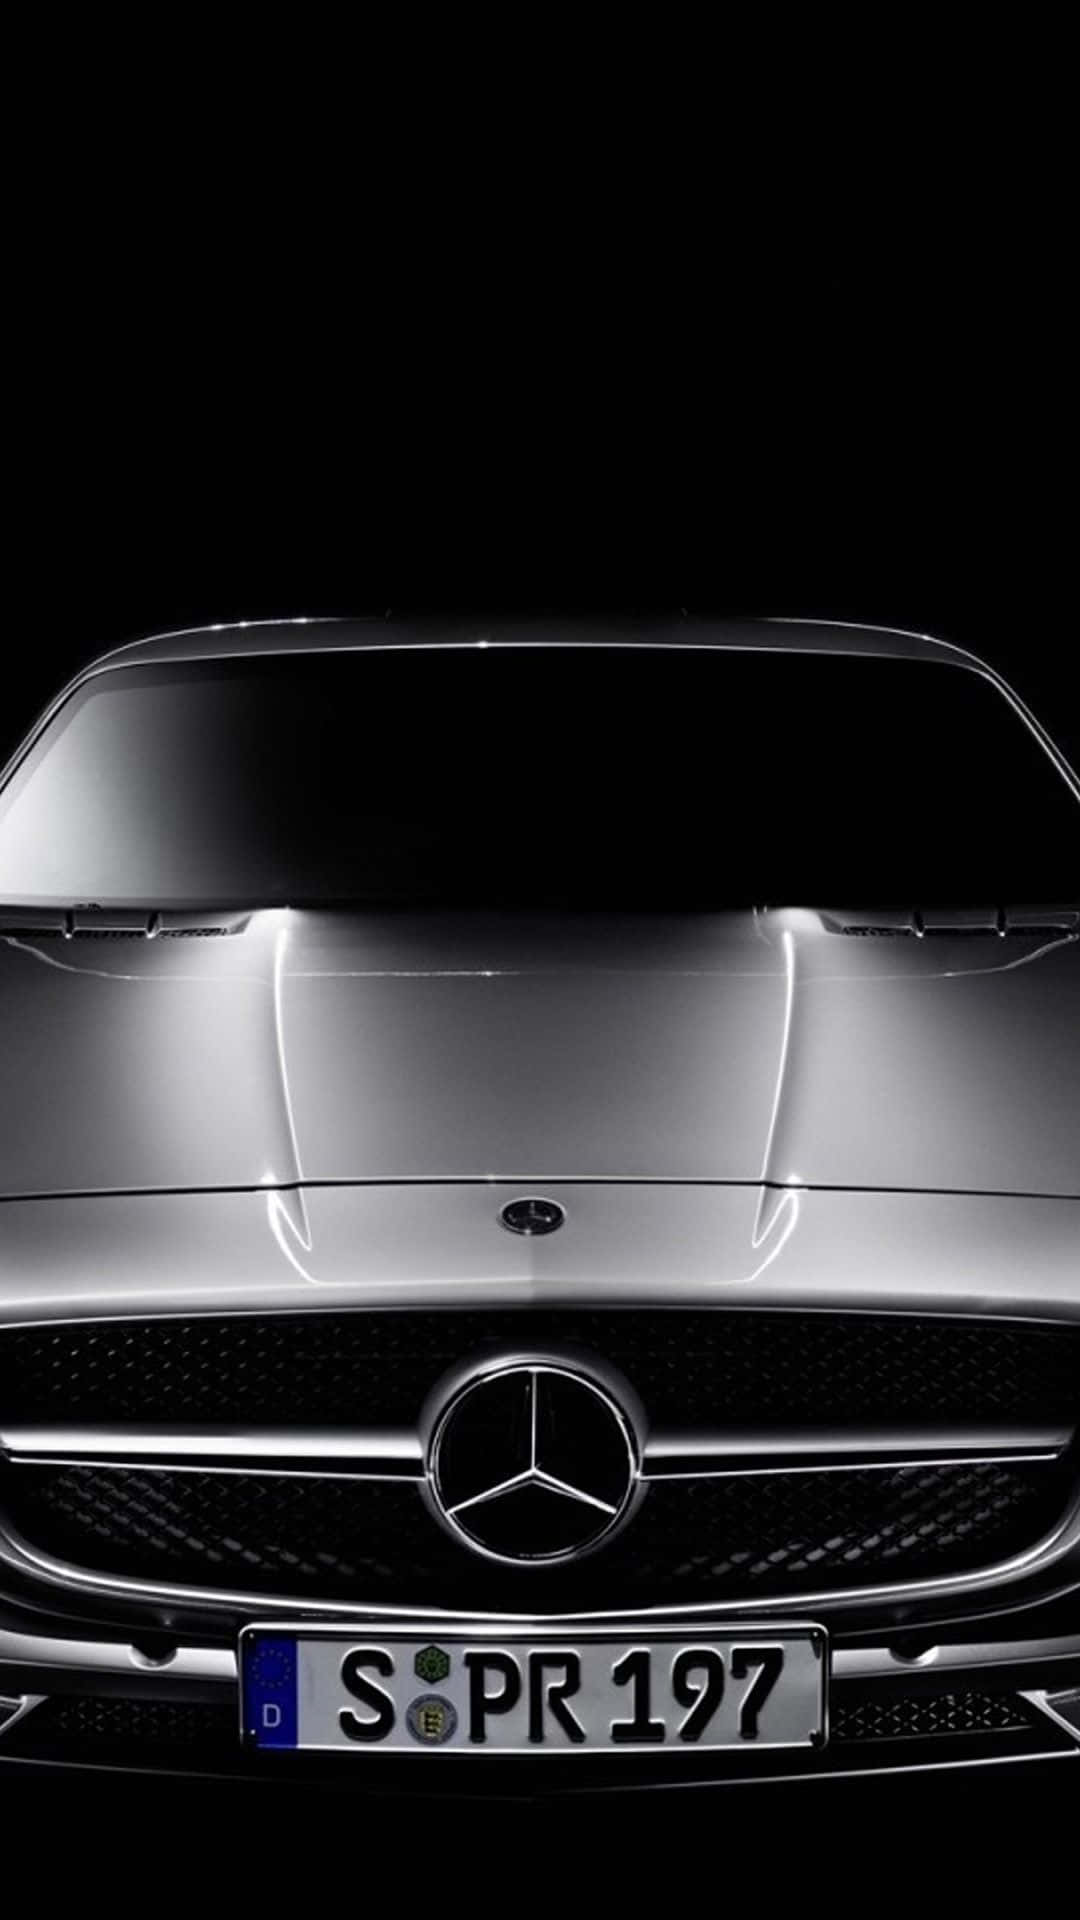 Show Off Your Style With Mercedes Benz Iphone Wallpaper